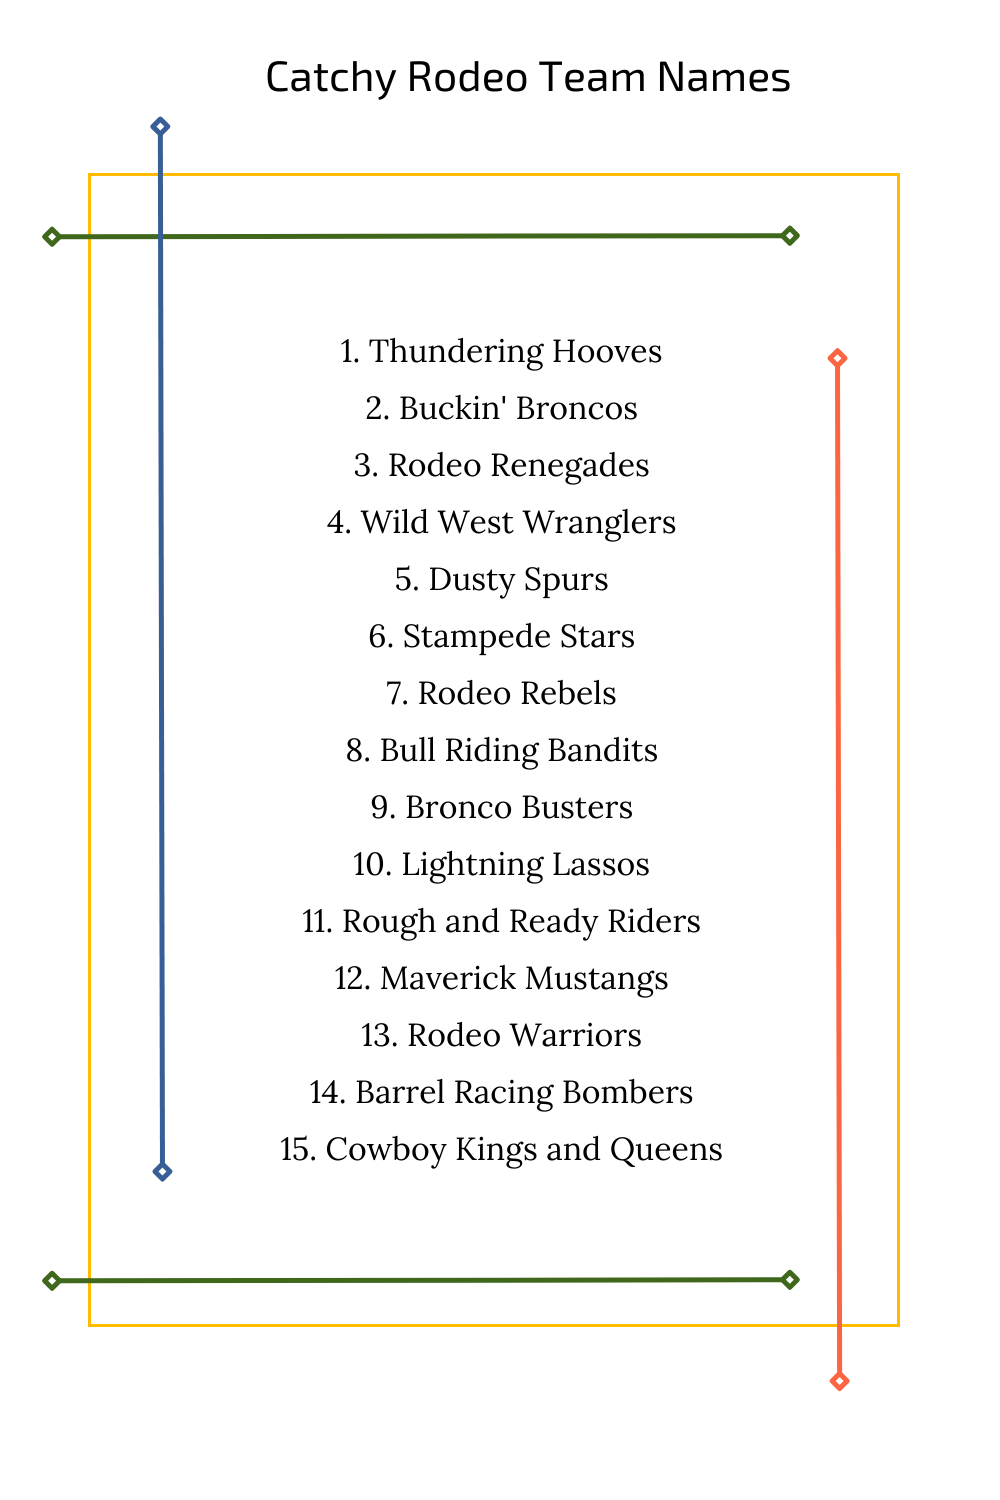 Catchy Rodeo Team Names